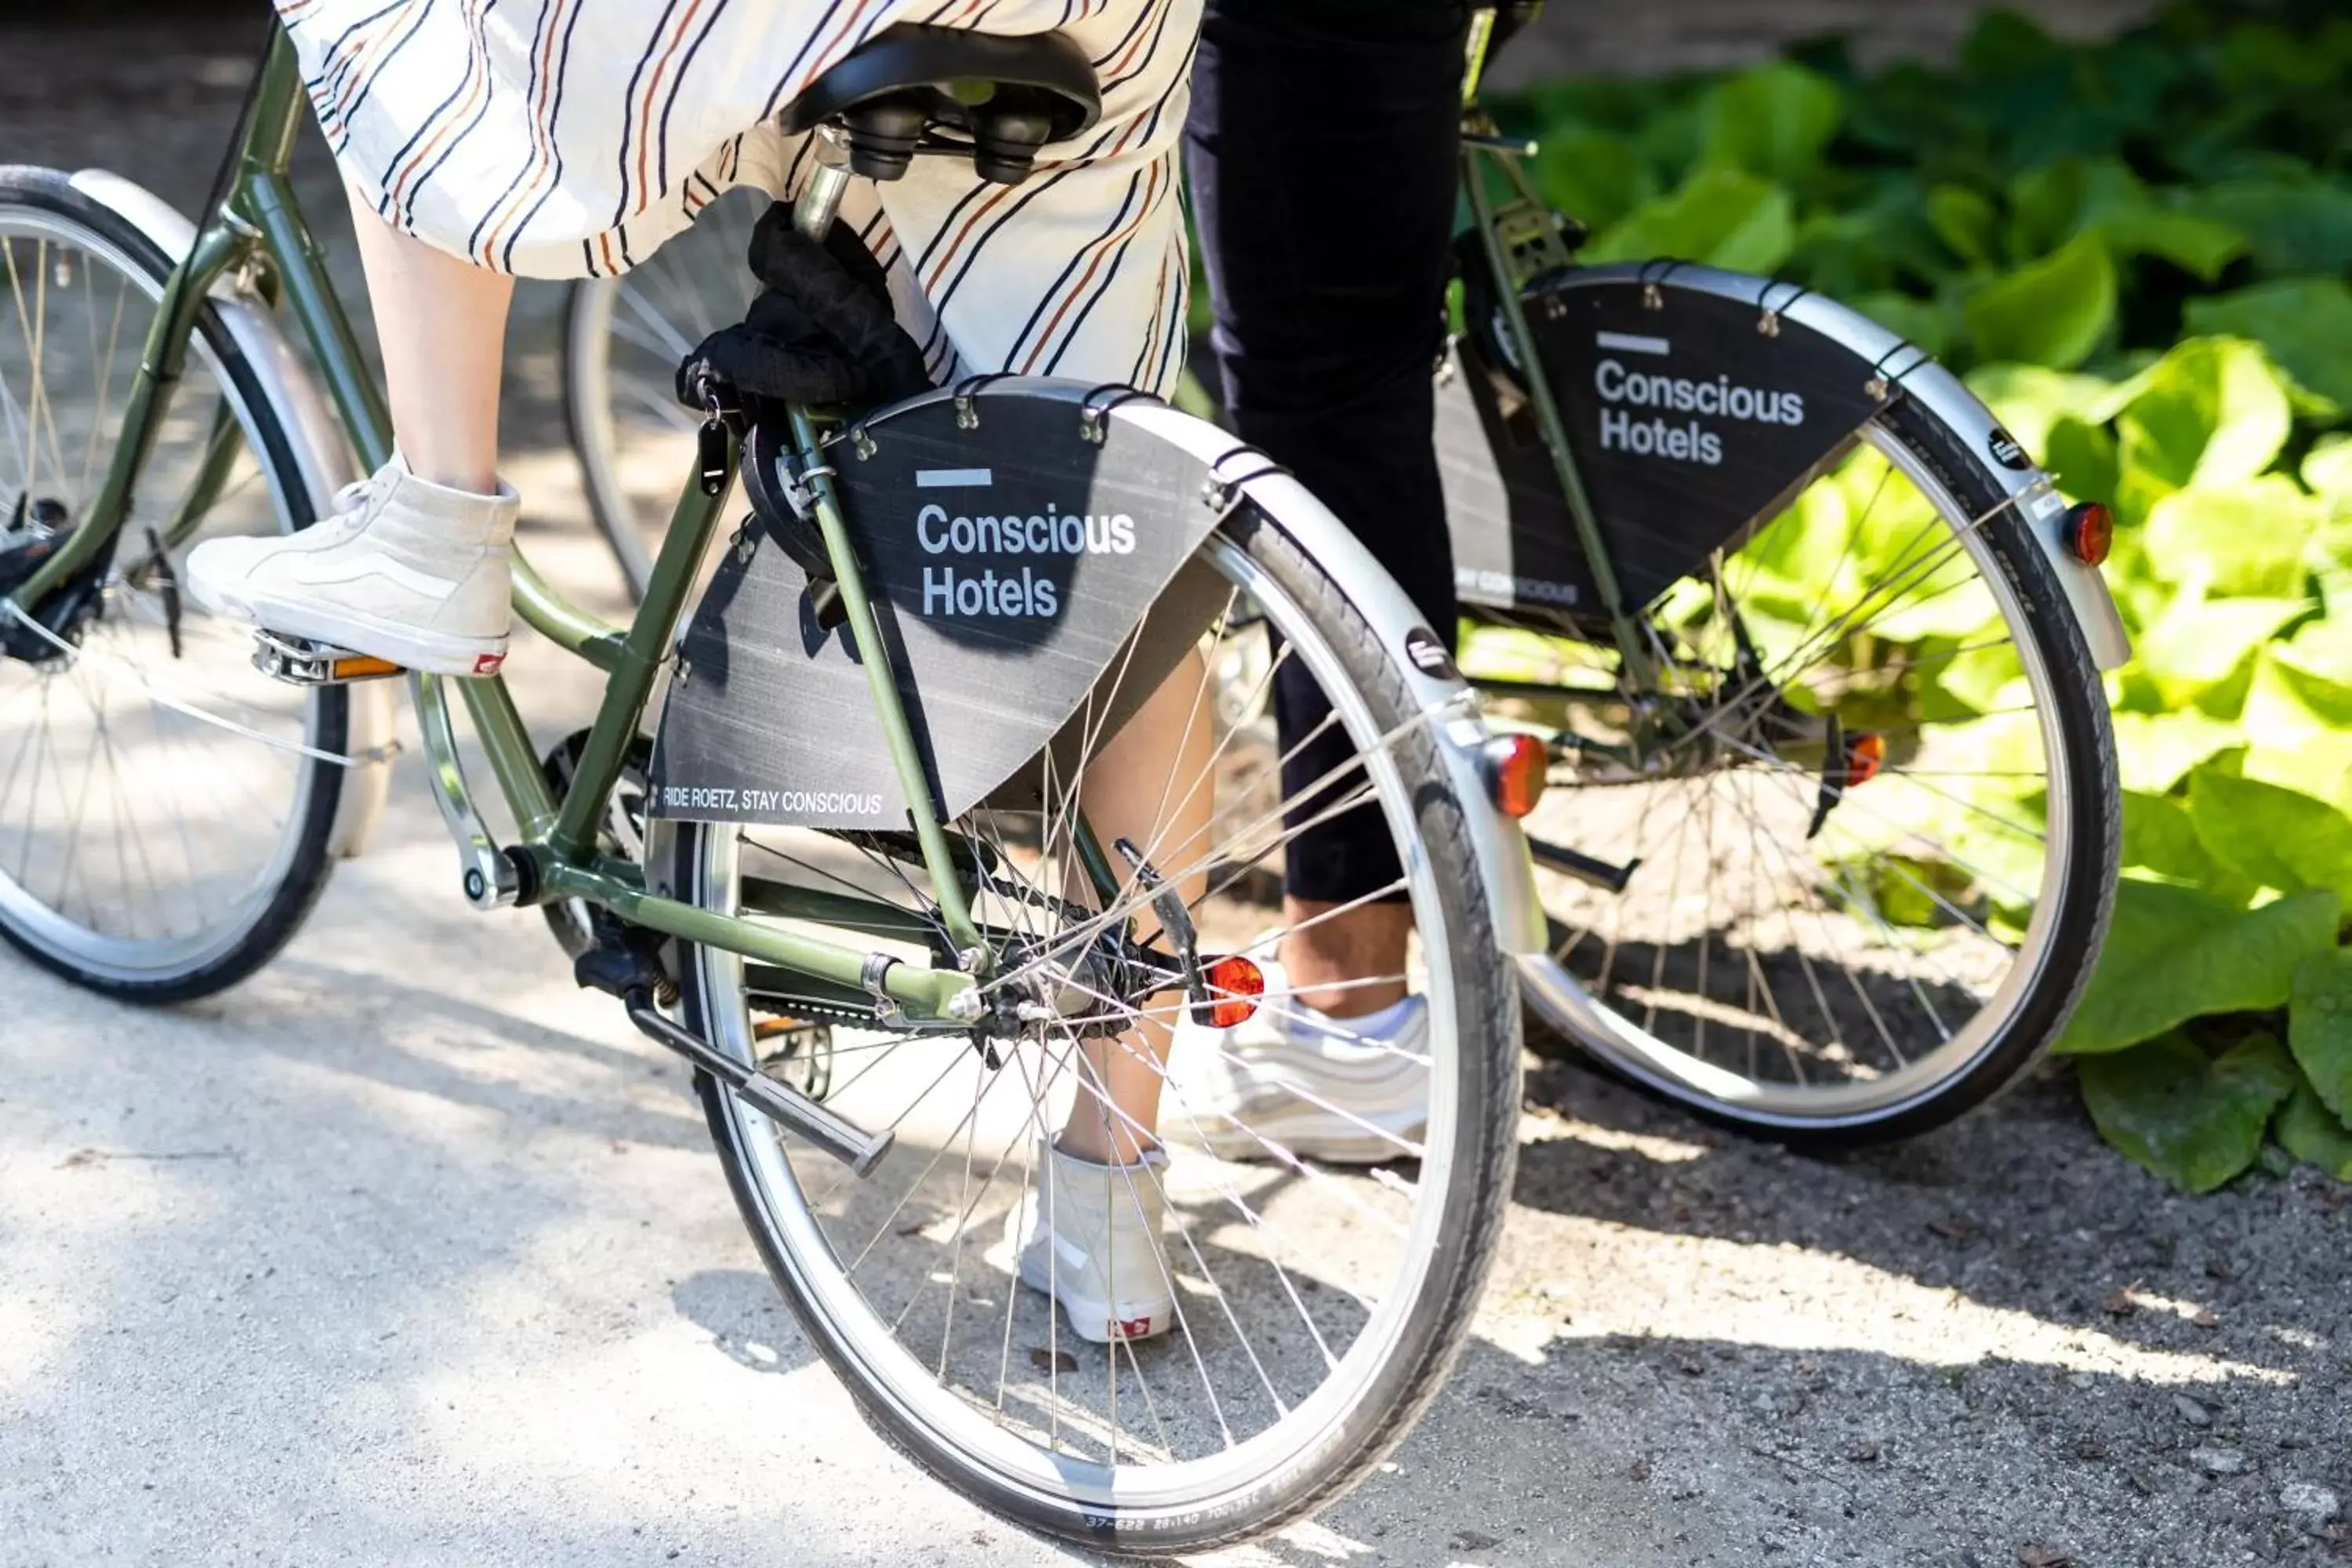 Cycling, Biking in Conscious Hotel Amsterdam City - The Tire Station